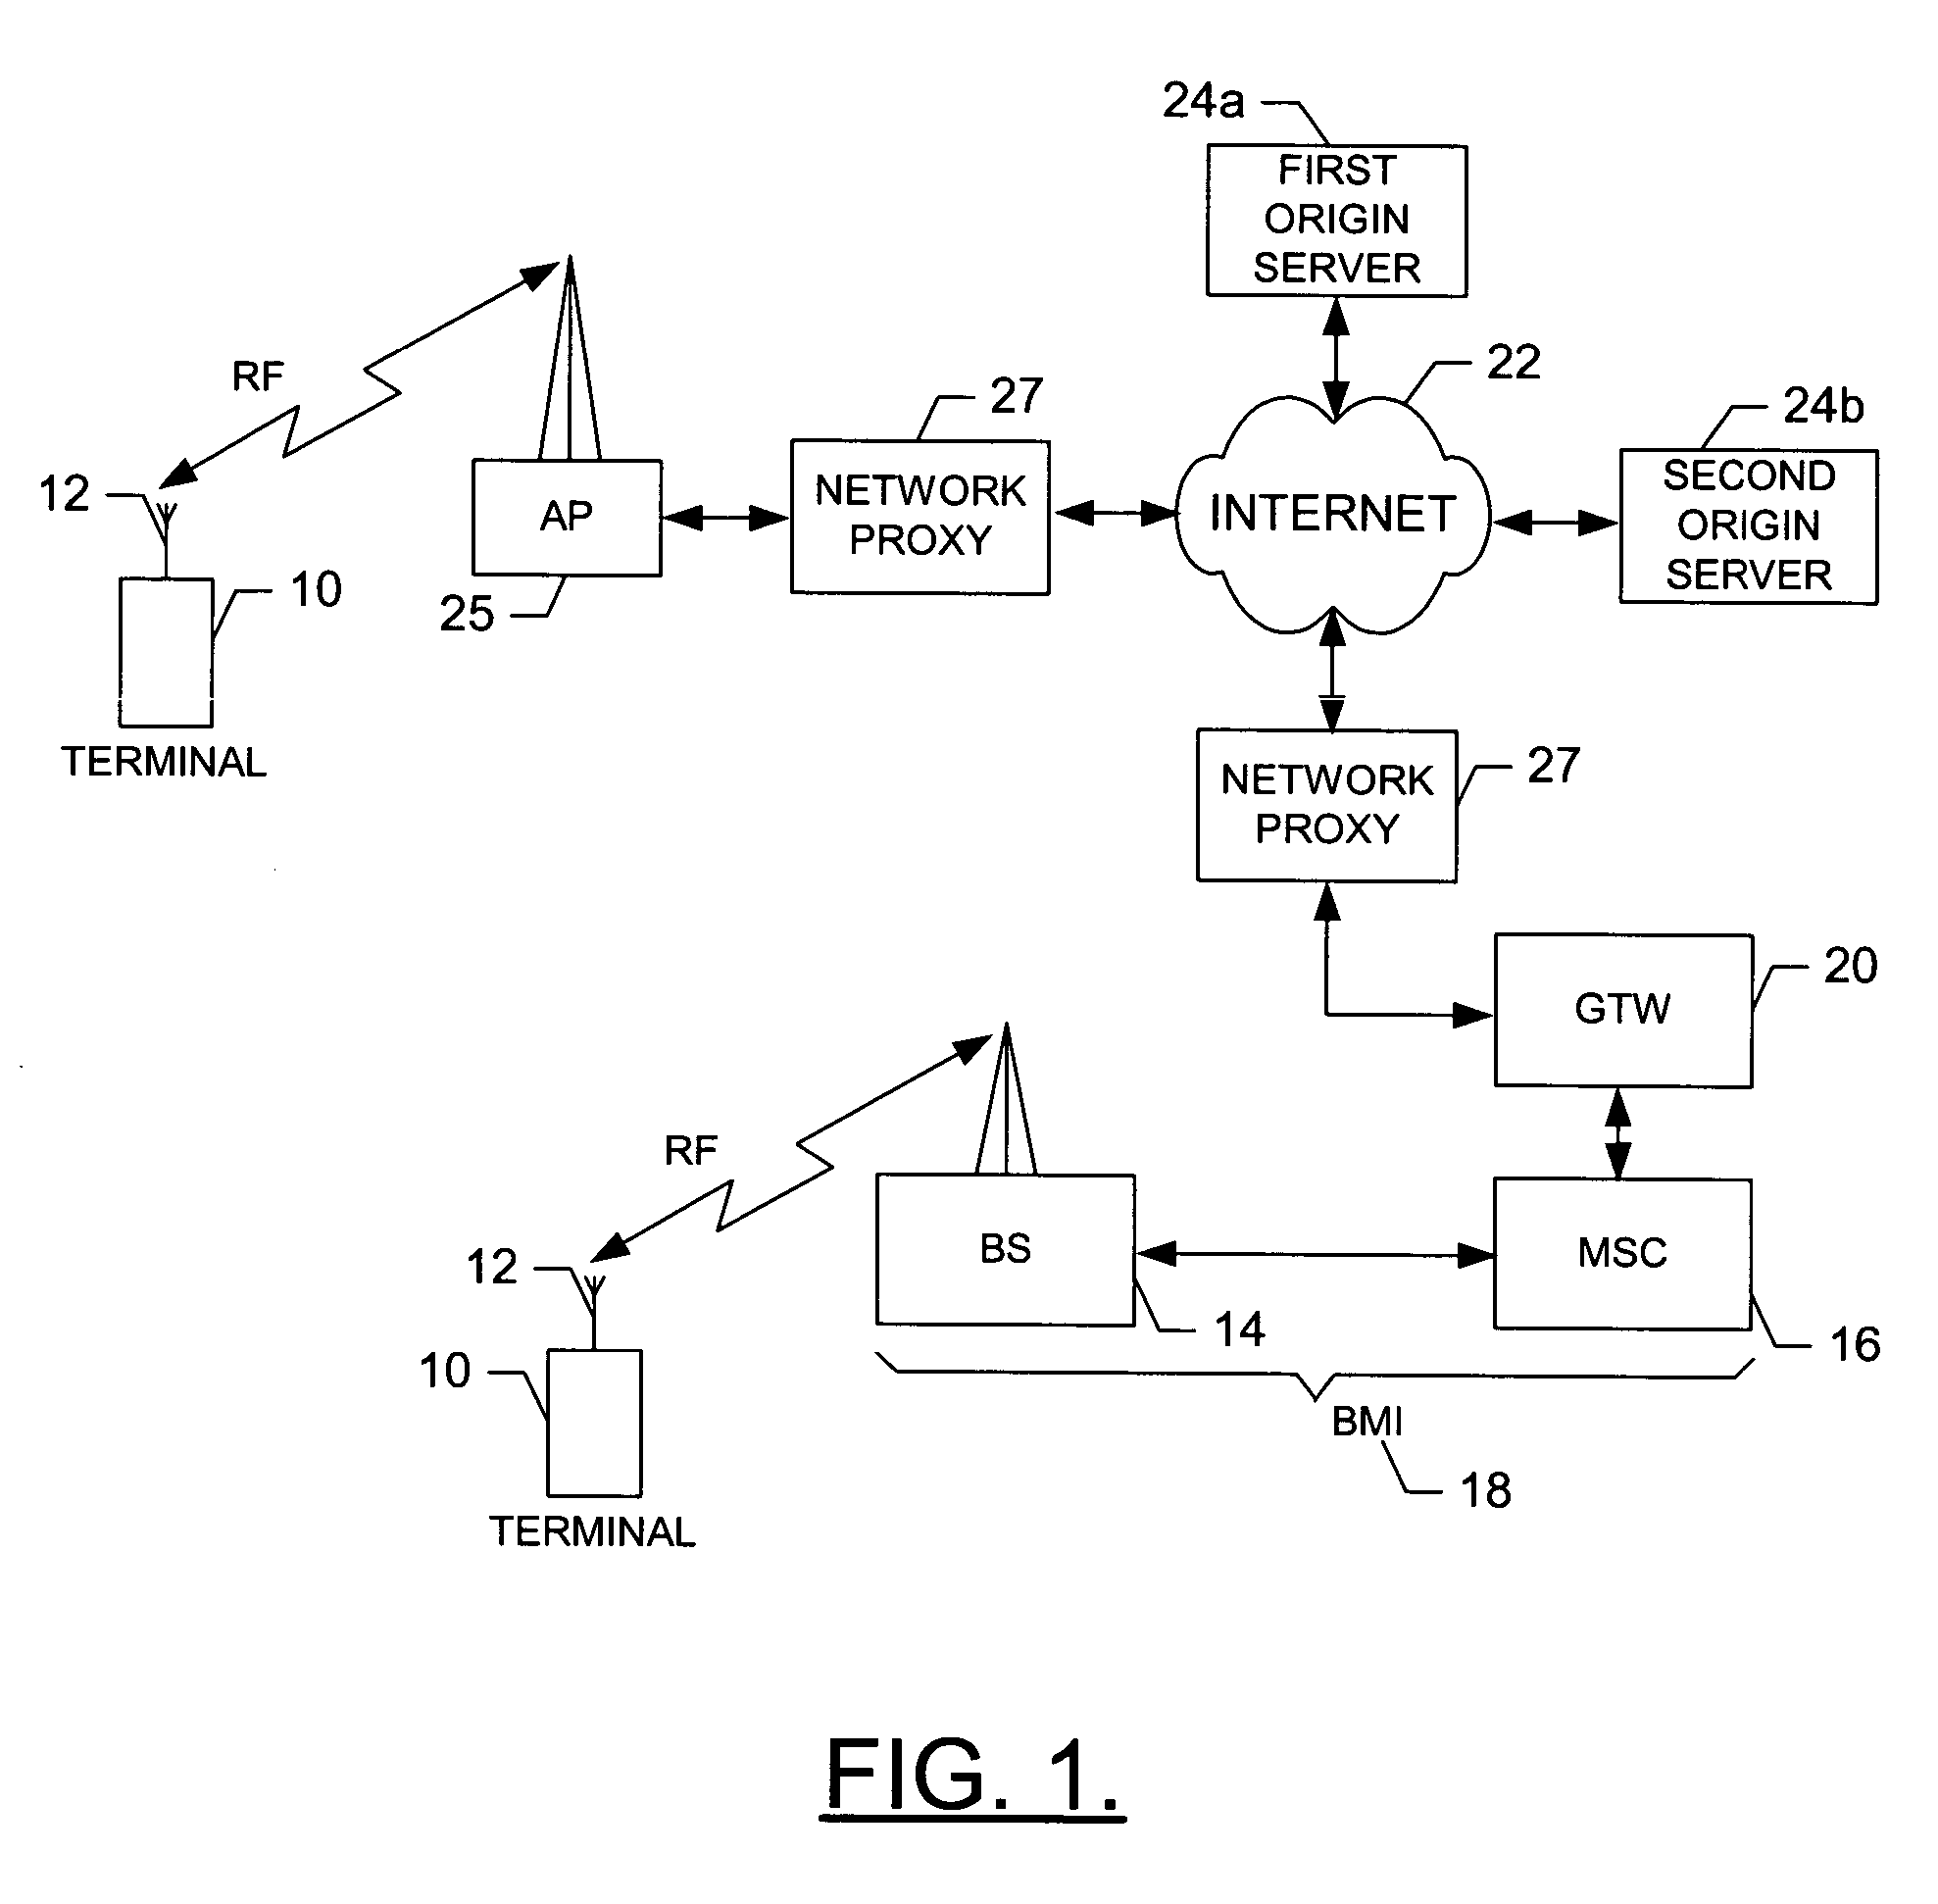 System and method for proxy-based redirection of resource requests